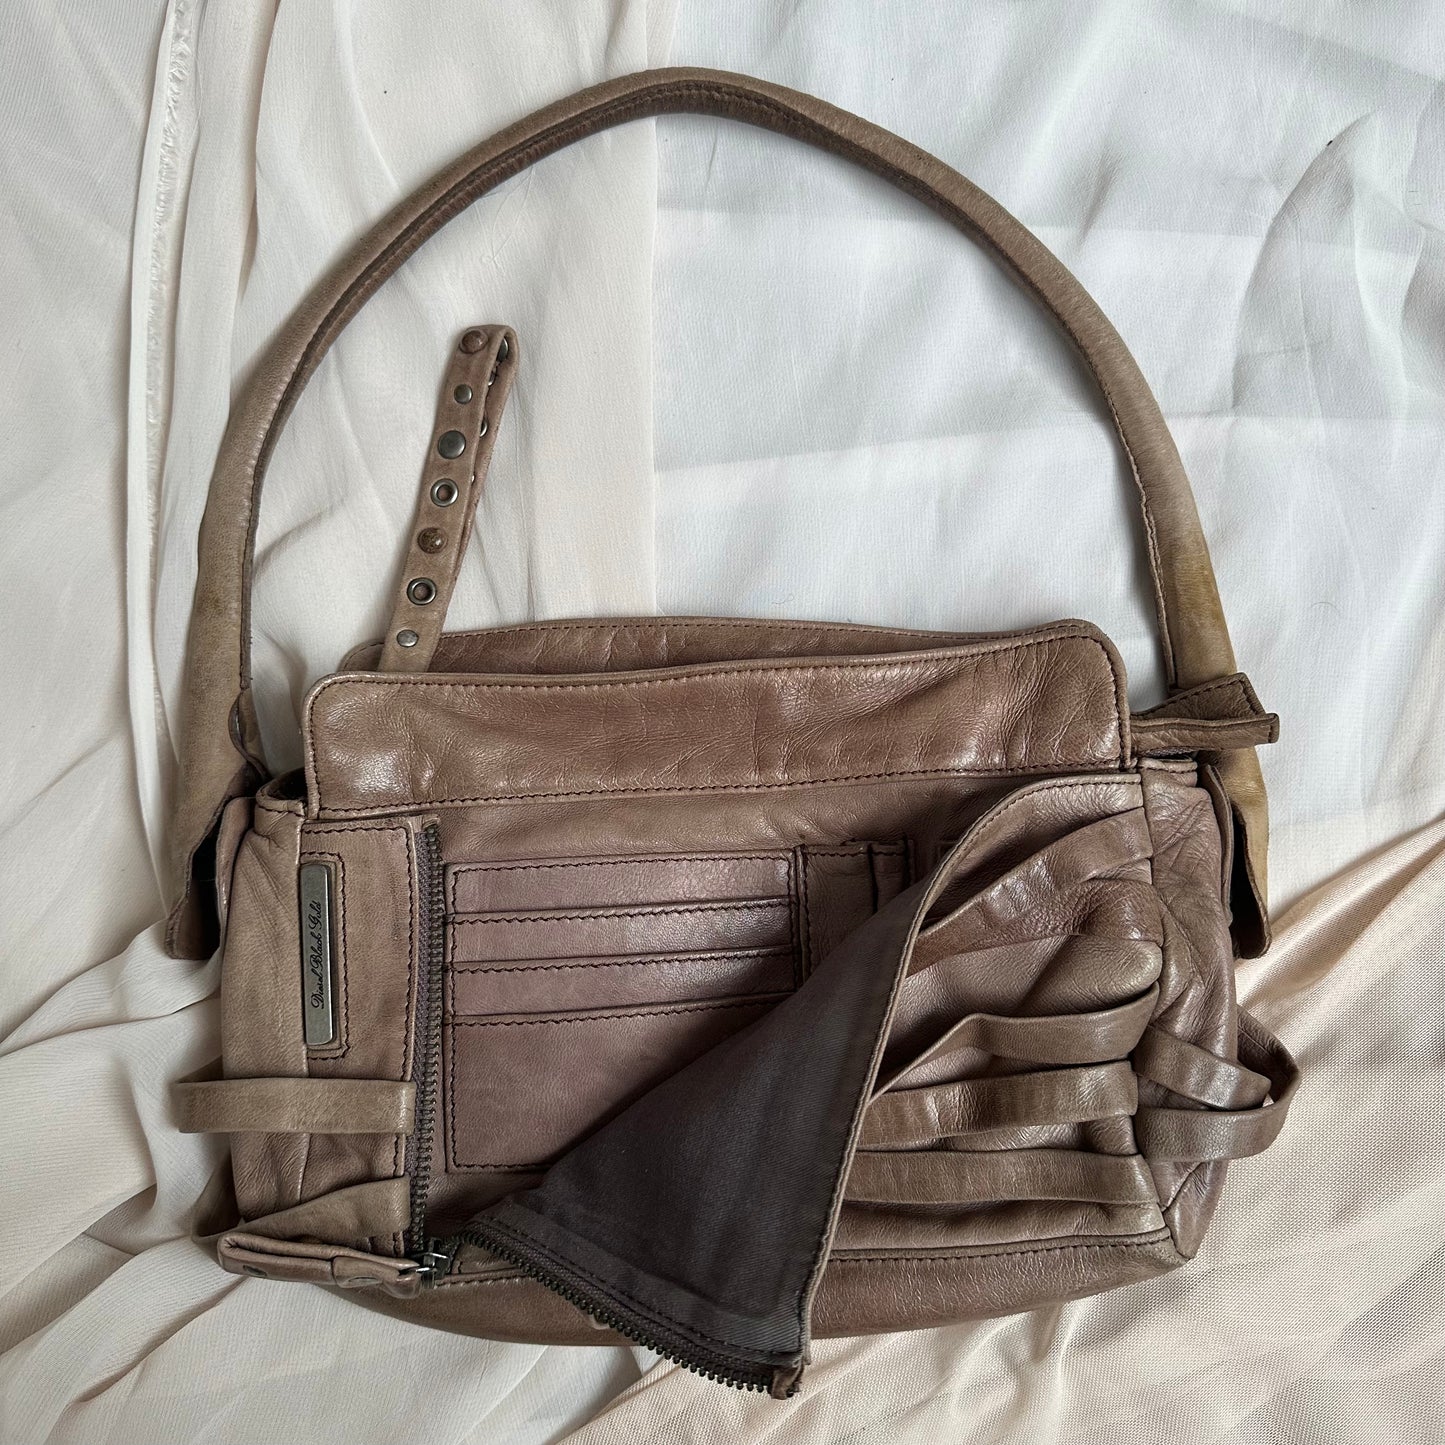 MODULAR LEATHER SHOULDER BAG IN PALE TAUPE by Diesel